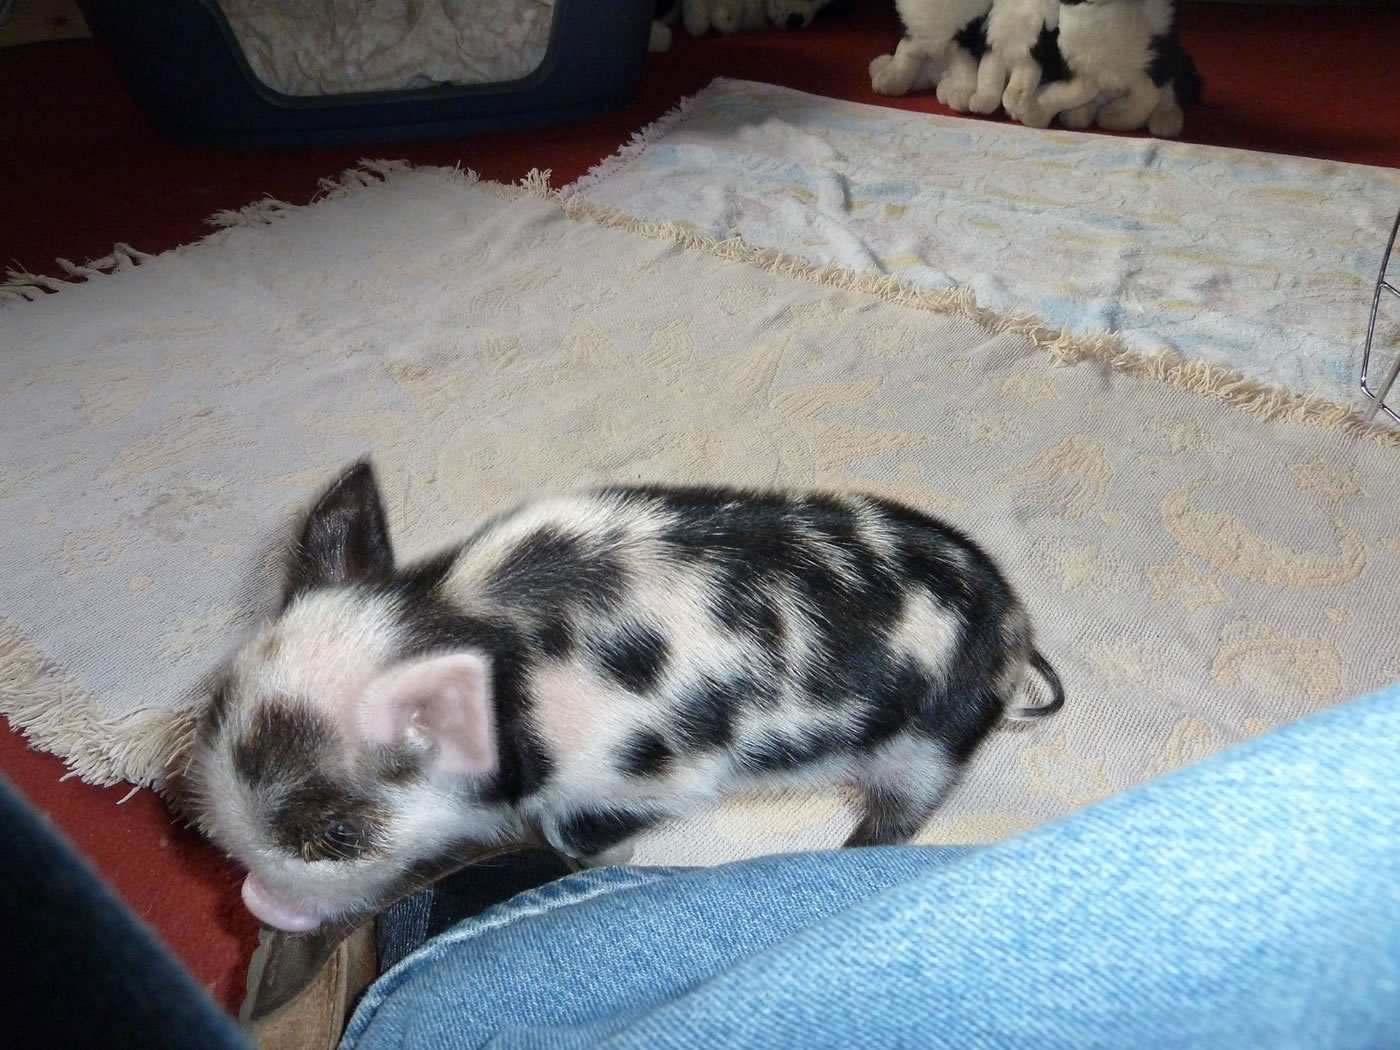 Pet piglet playing with sandals, while they are on my feet.